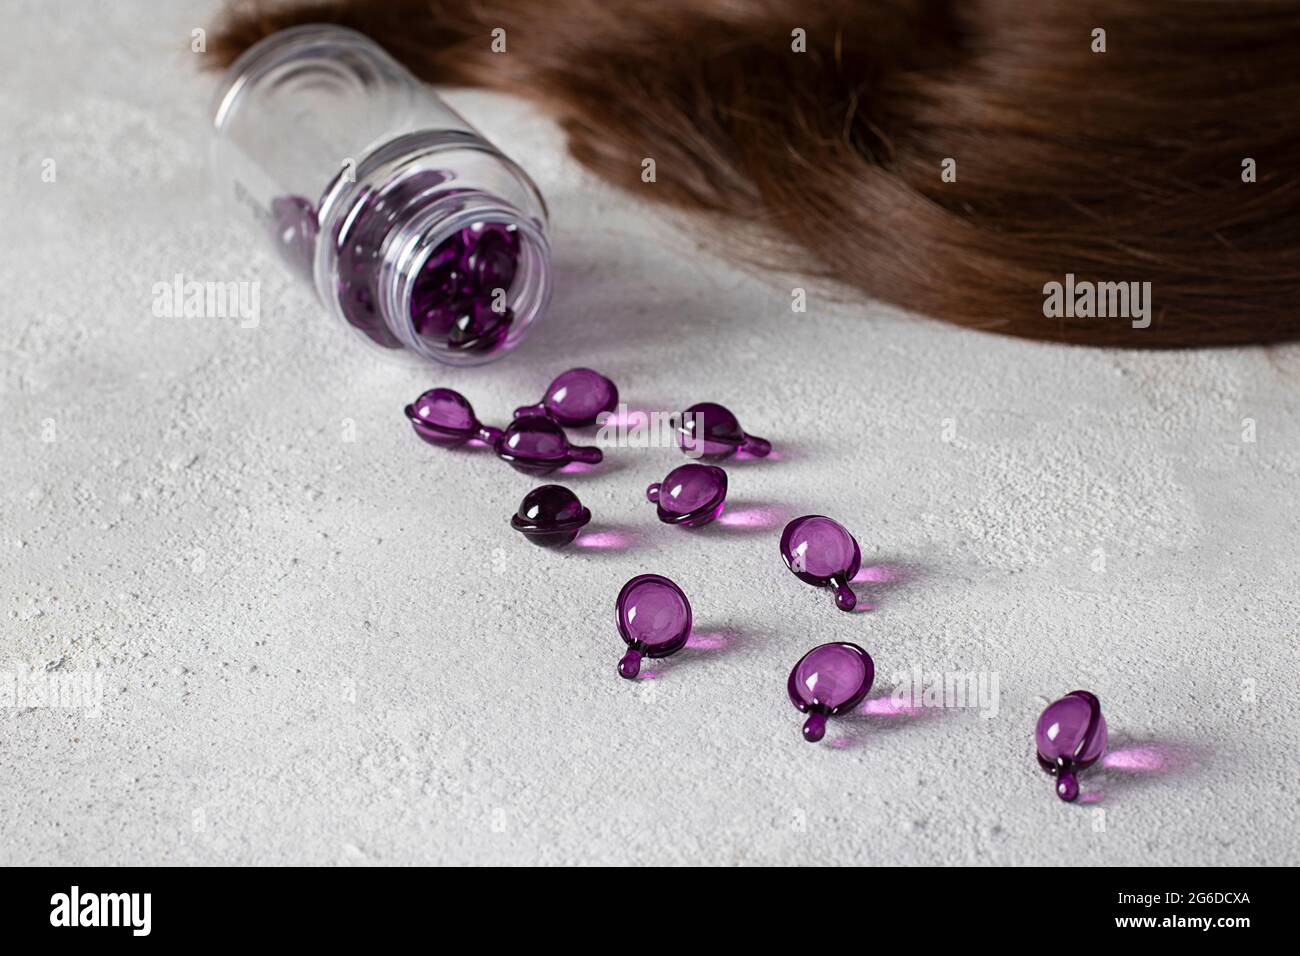 Hair Vitamin Capsules on a Gray Background: Hair Treatment and Care Products With Oil for Damaged, Highlighted, Permed and Colored Hair Stock Photo